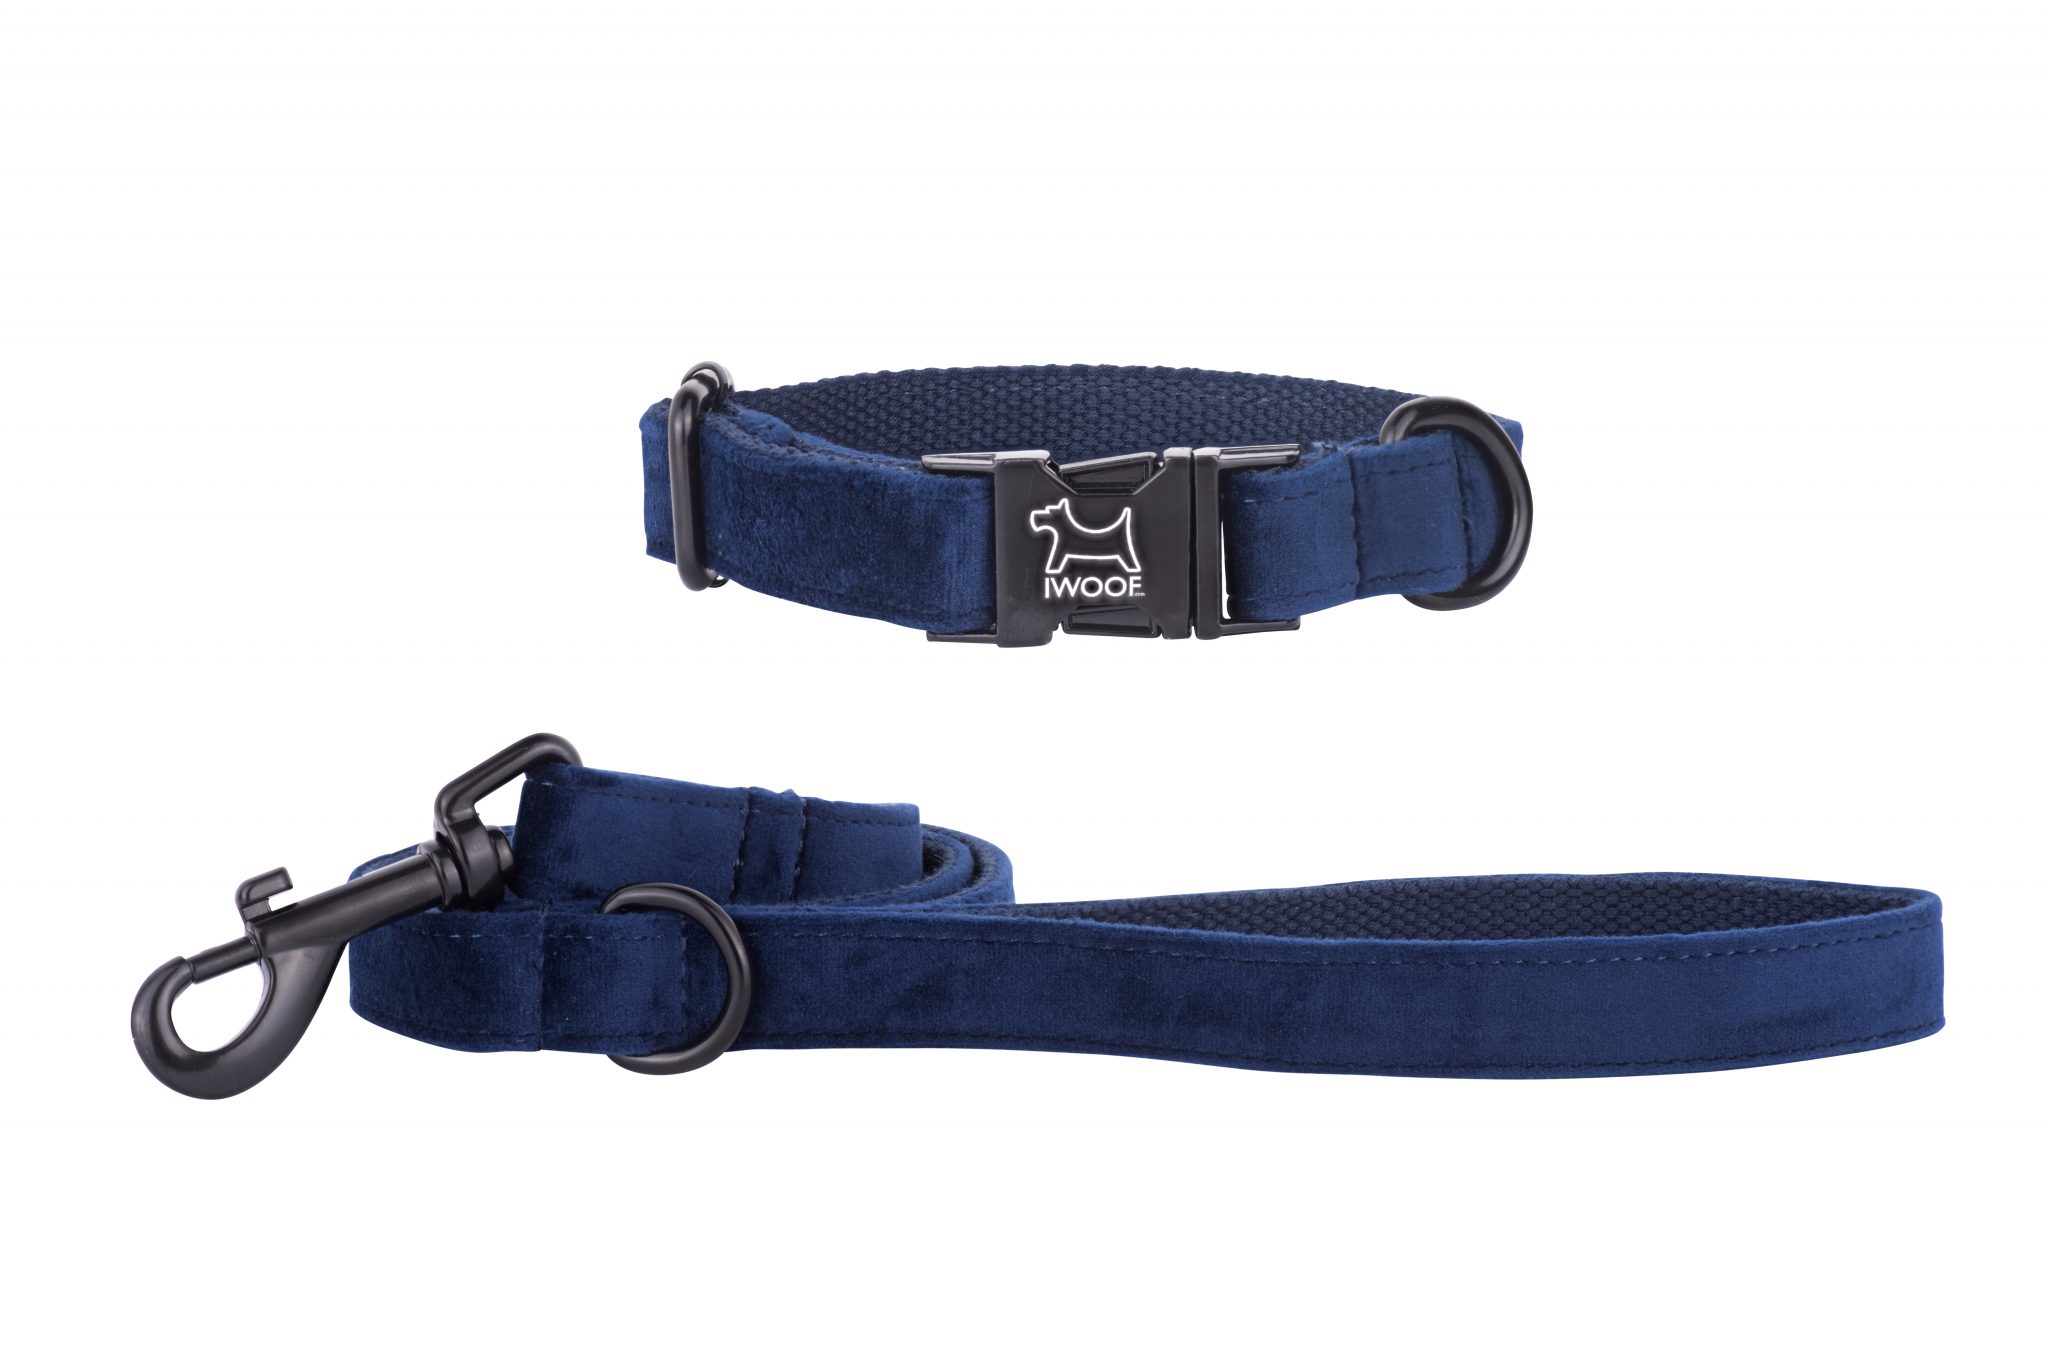 Sapphire designer dog collar and matching dog lead by IWOOF with black fittings